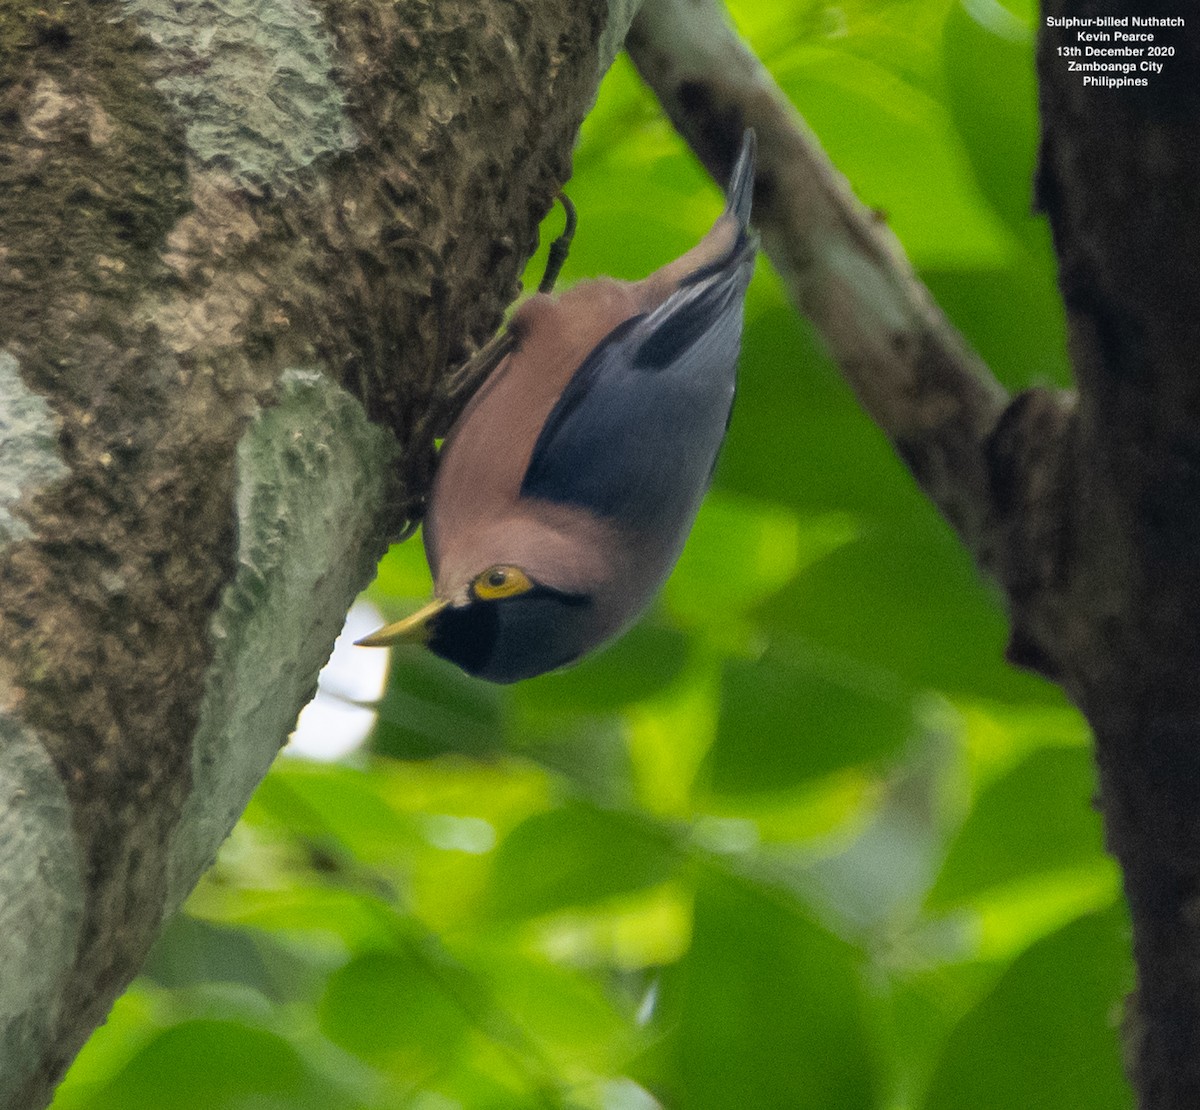 Sulphur-billed Nuthatch - Kevin Pearce